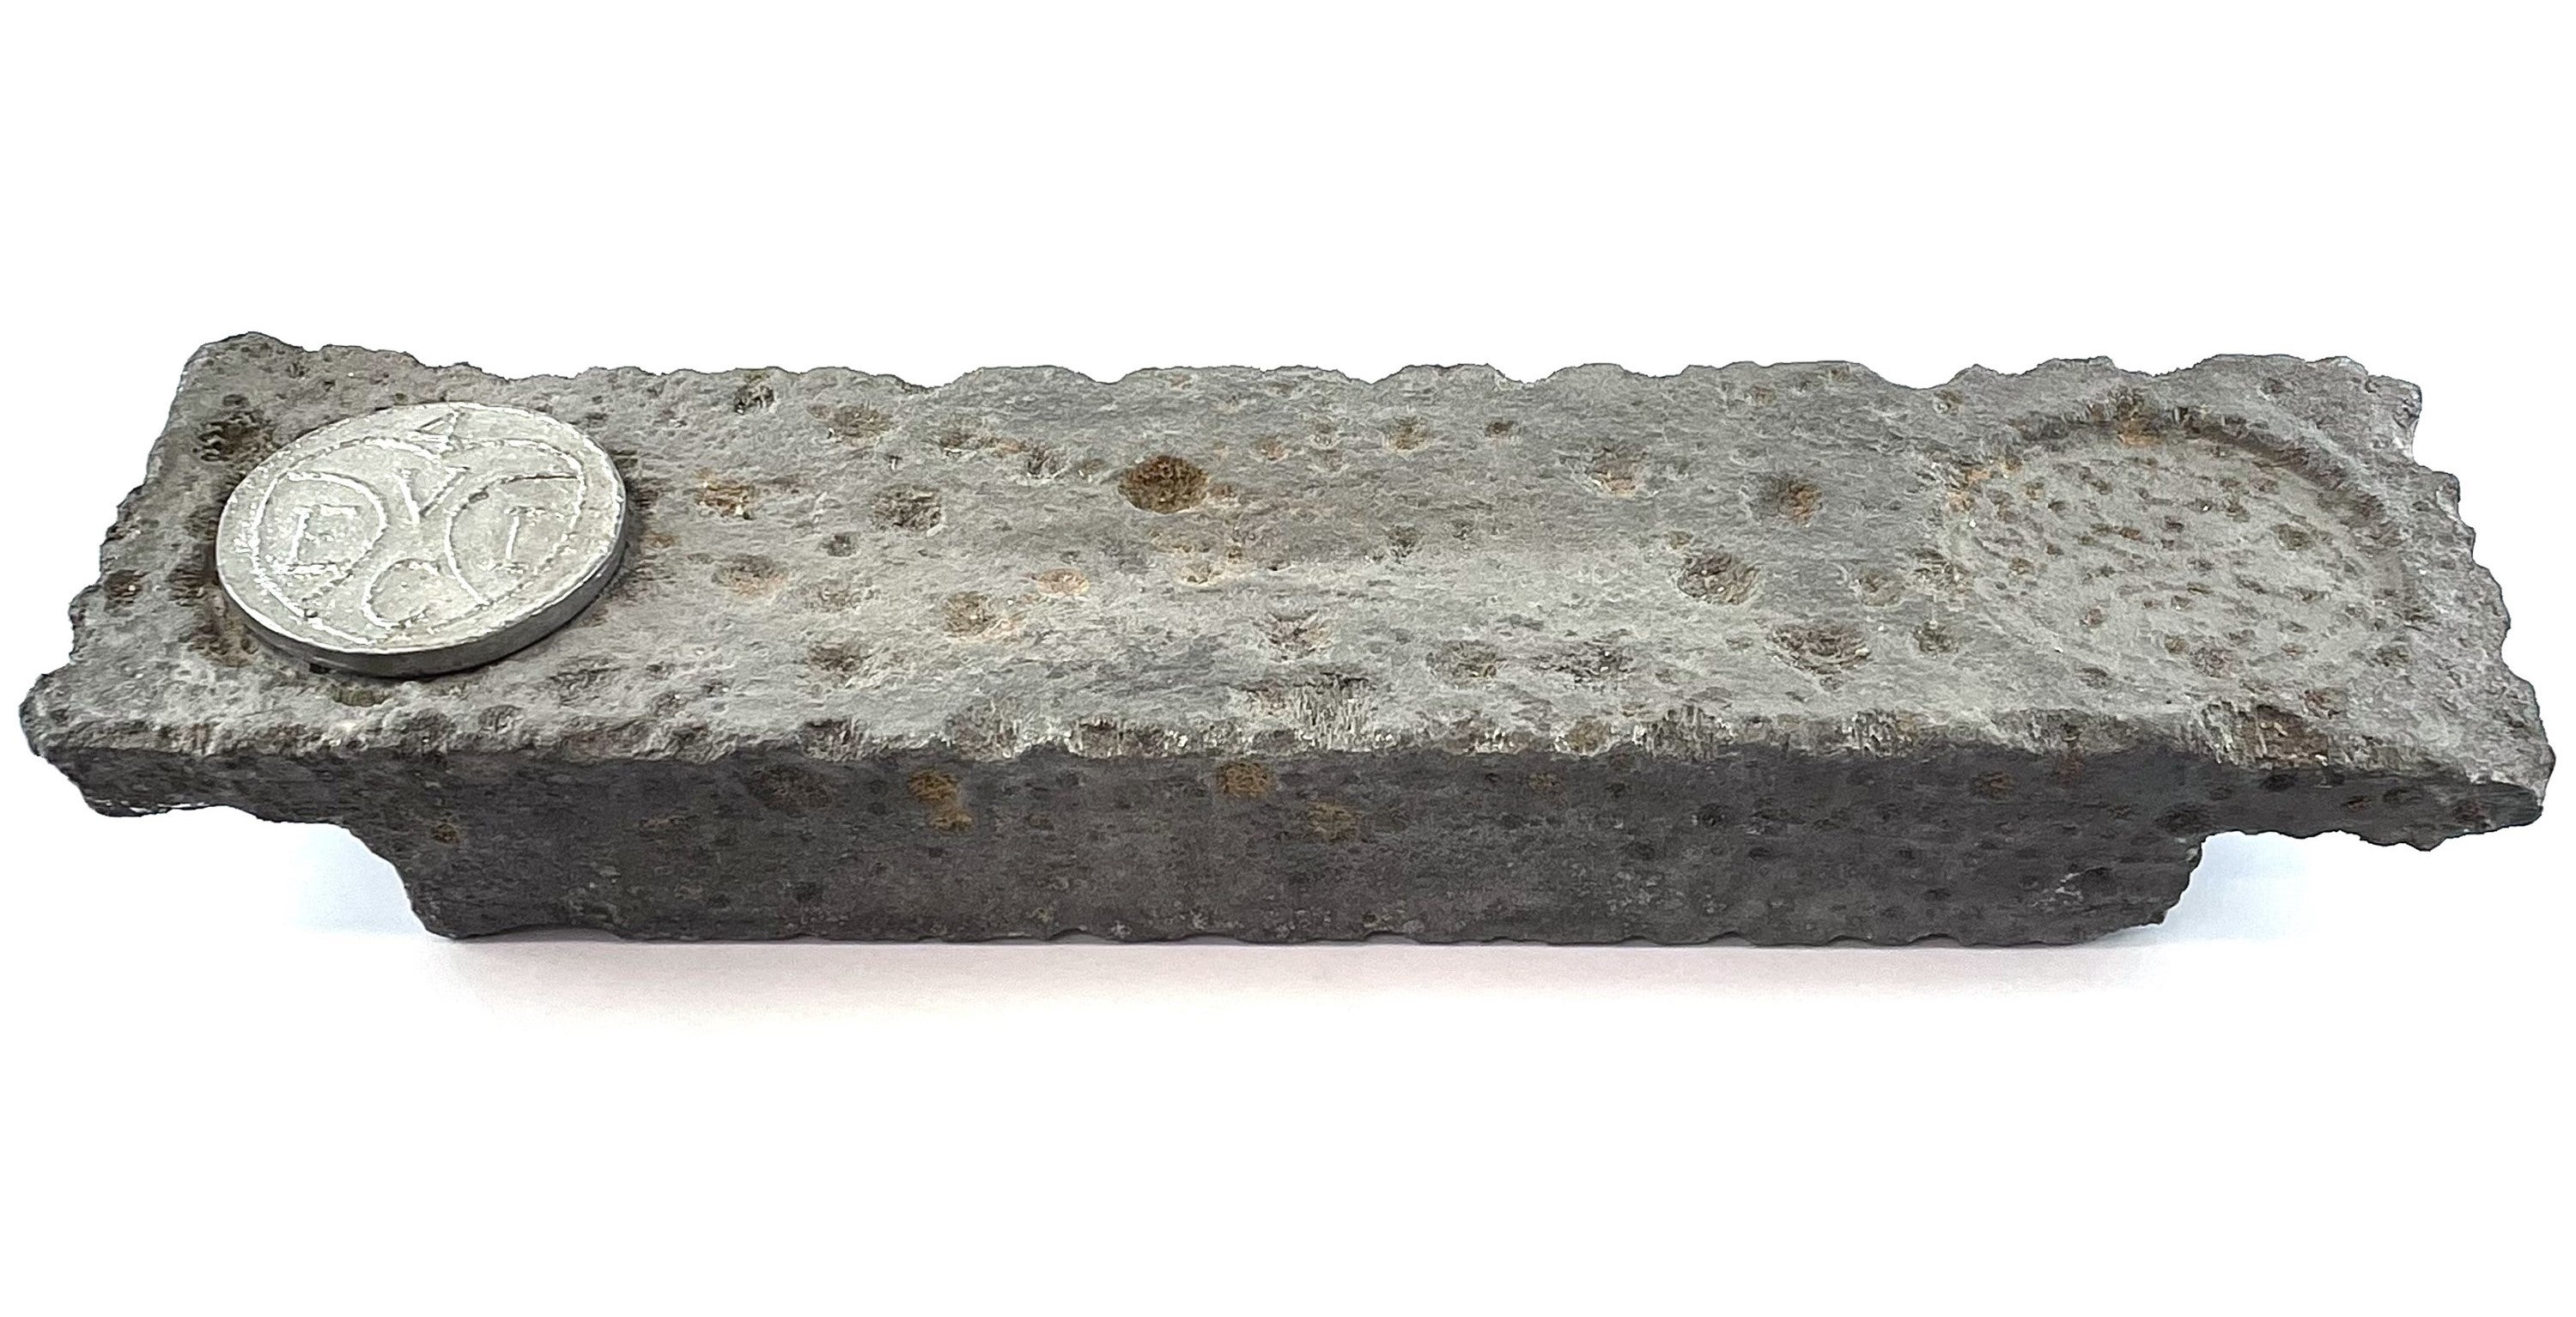 The ingot recovered from the wreck of the HMS Abergavenny (David Lay Auctions/PA)